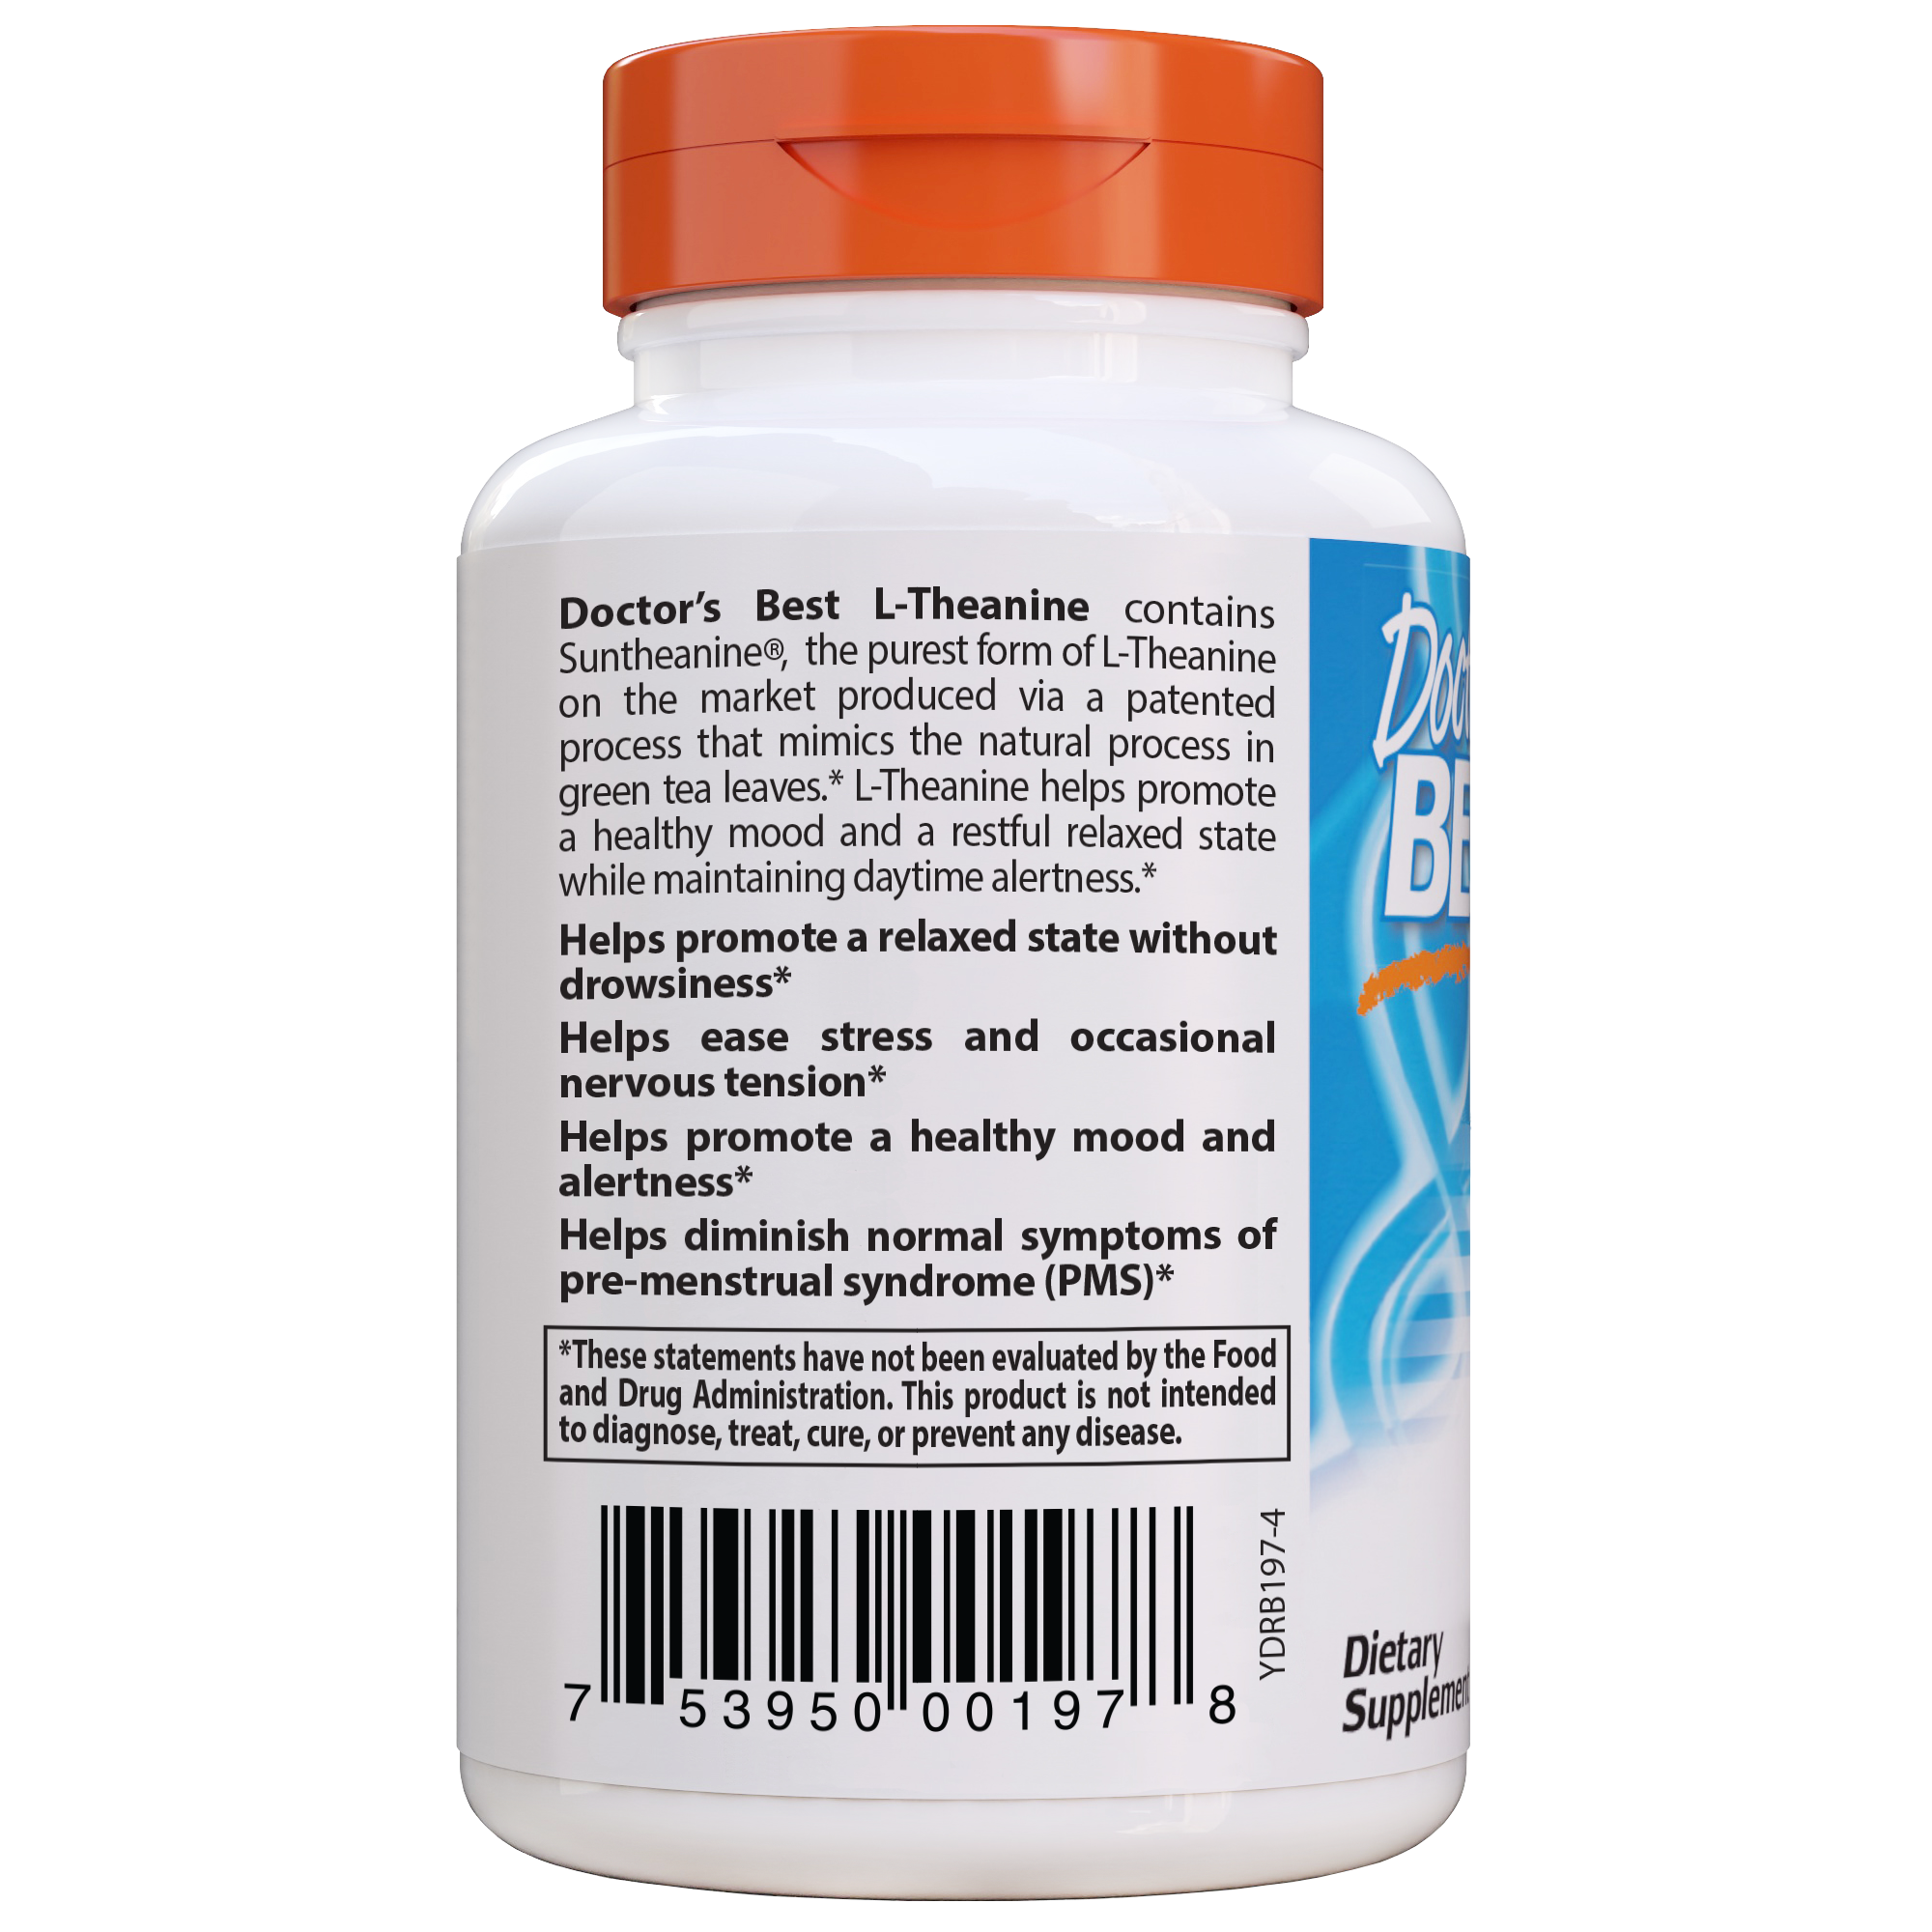 Doctor's Best Suntheanine L-Theanine, 150mg, 90 vcaps